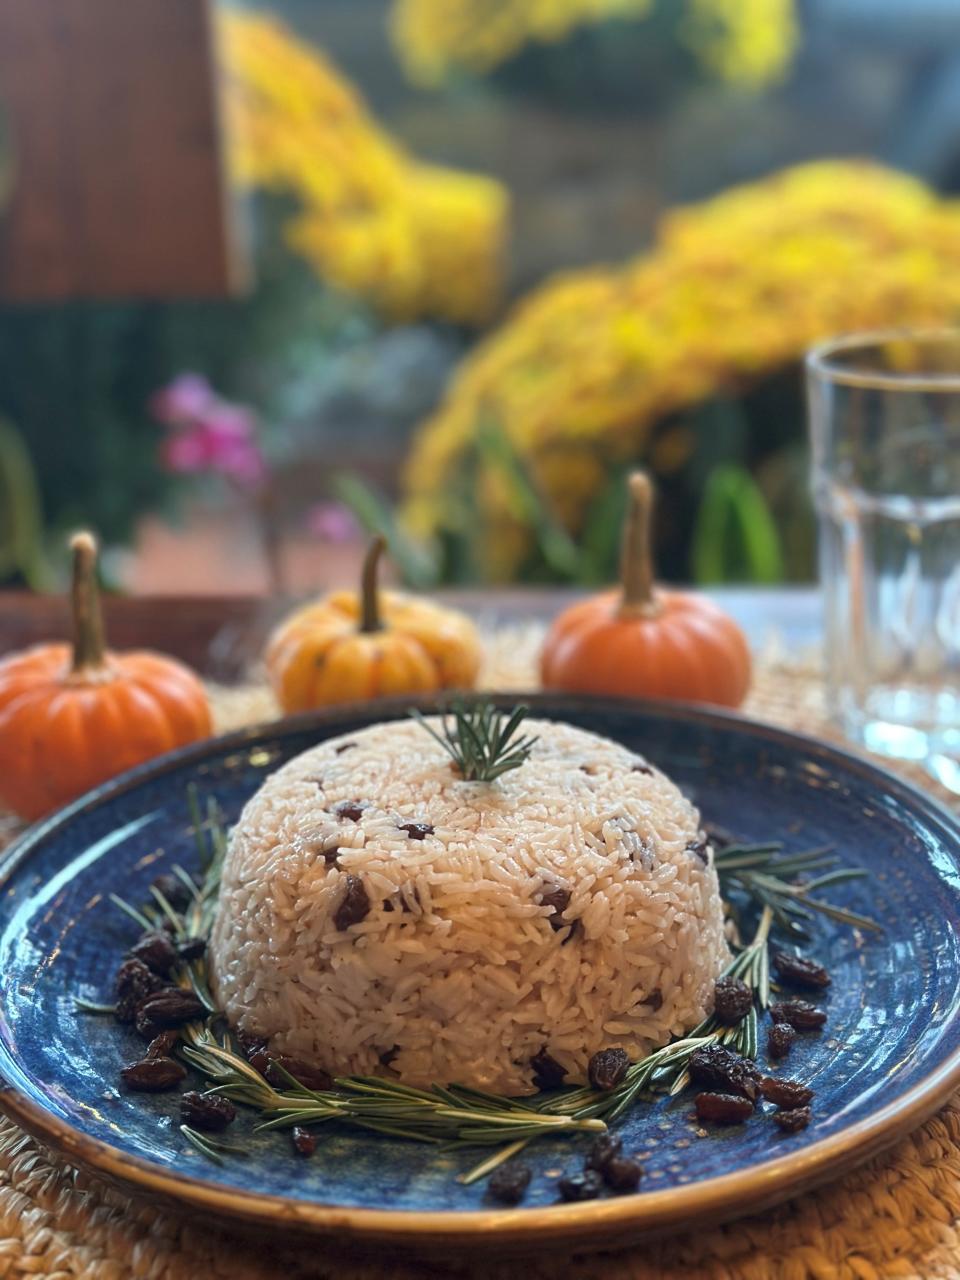 Coconut rice, a popular Brazilian dish that Samba's chef and owner makes for Thanksgiving